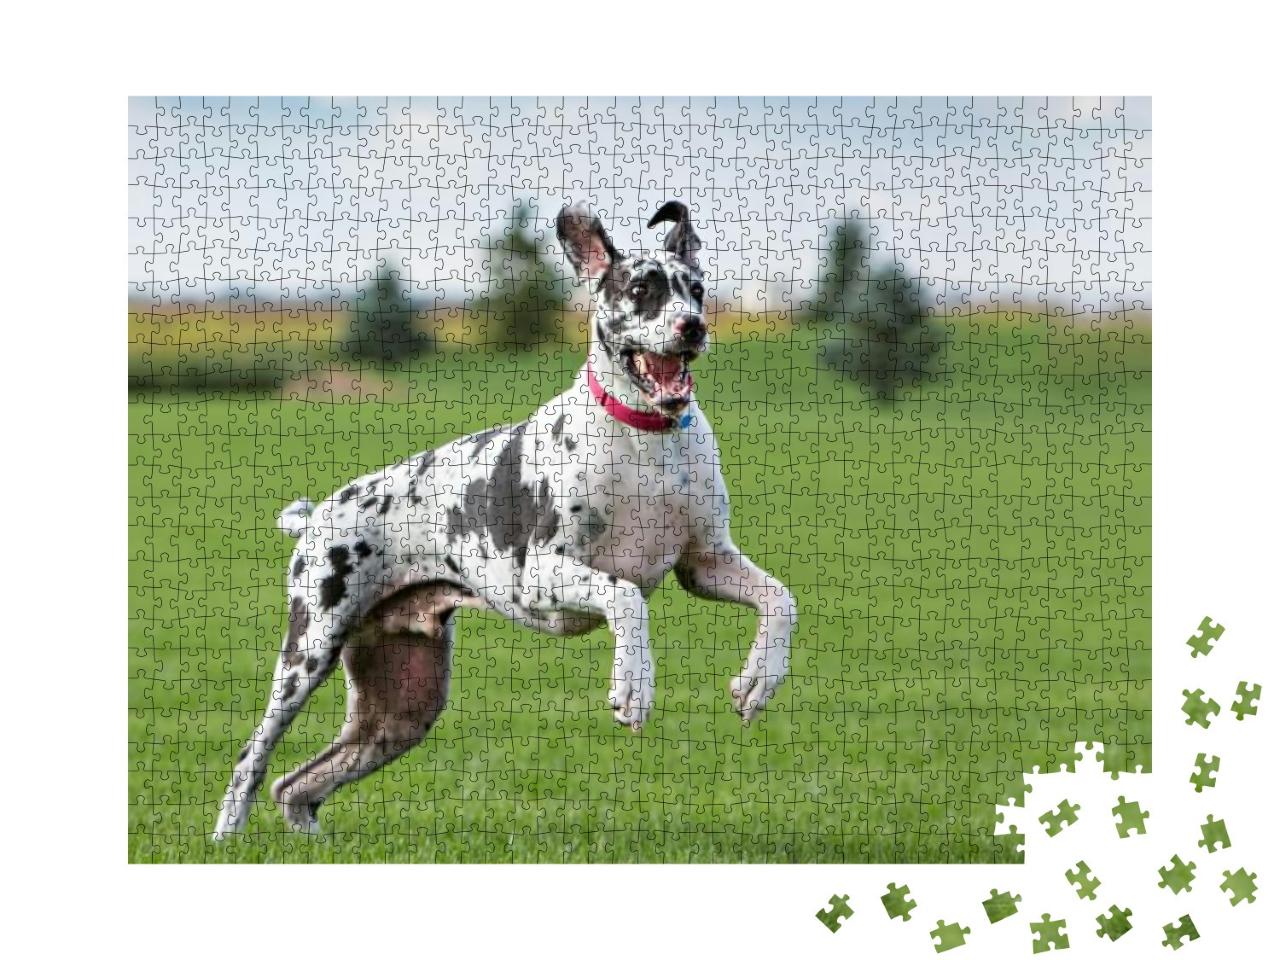 Great Dane Outside in a Yard on Green Grass... Jigsaw Puzzle with 1000 pieces